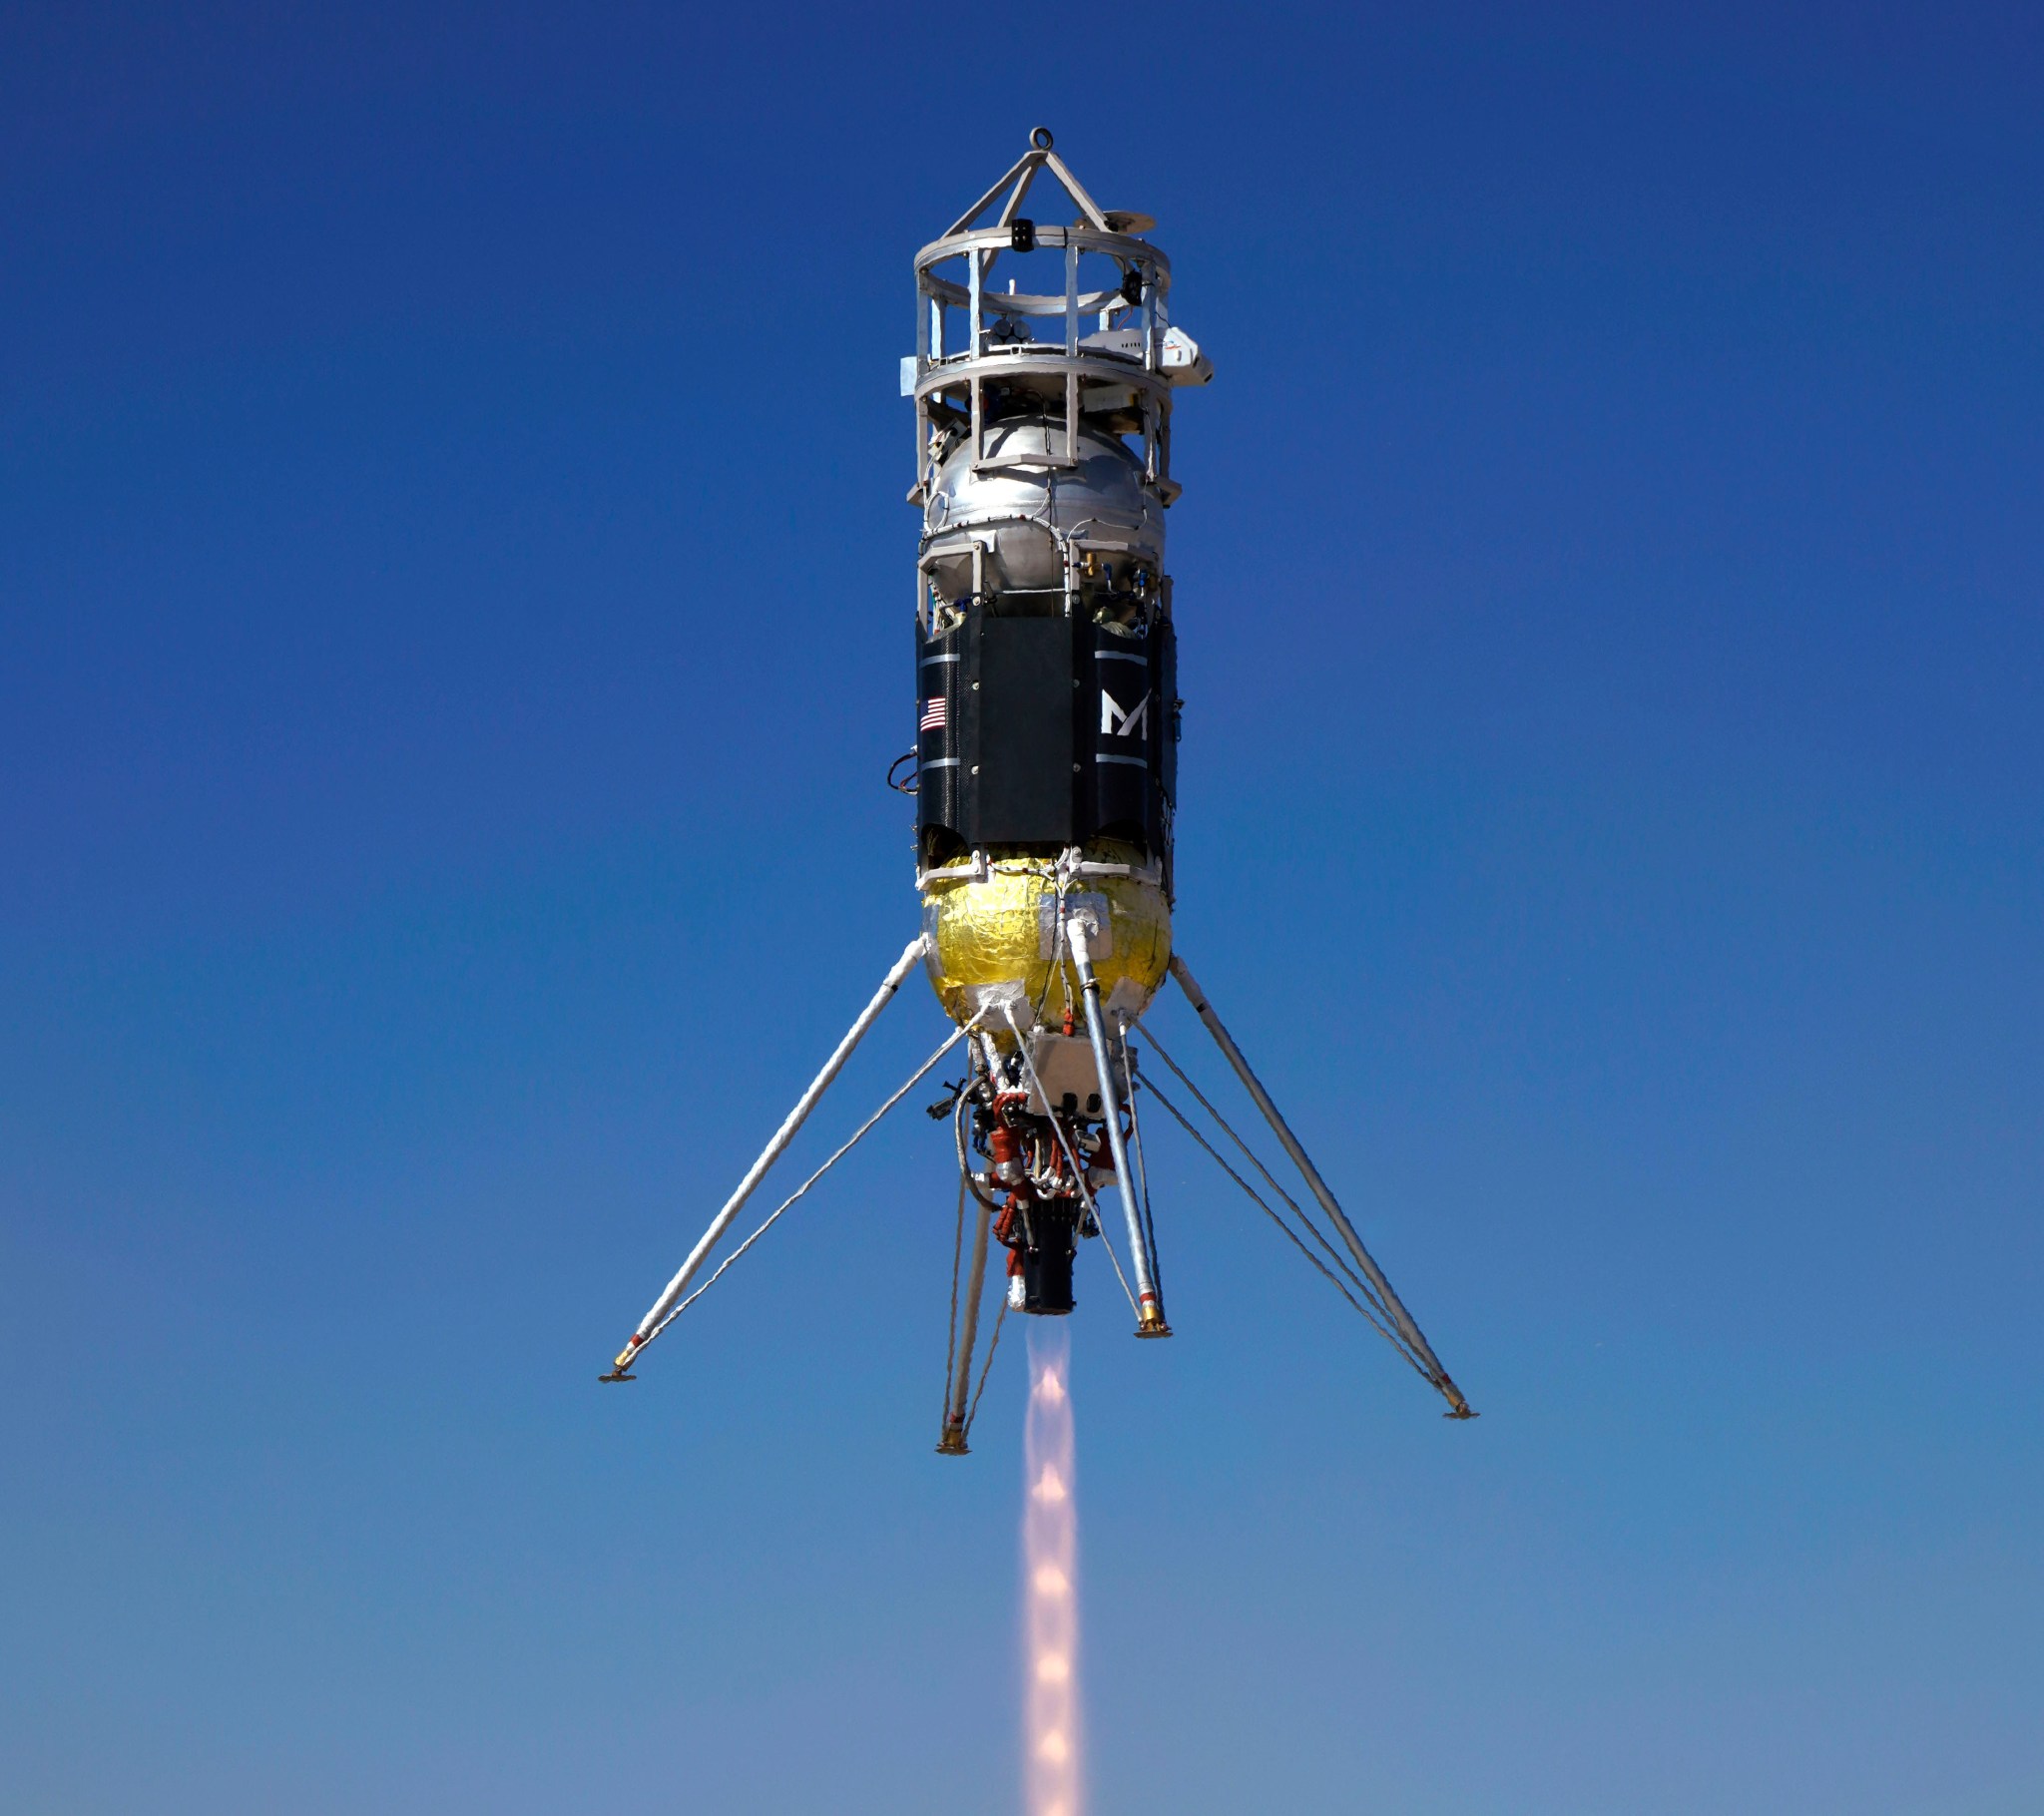 A terrain relative navigation system was tested on a Masten Space Systems Xodiac rocket.